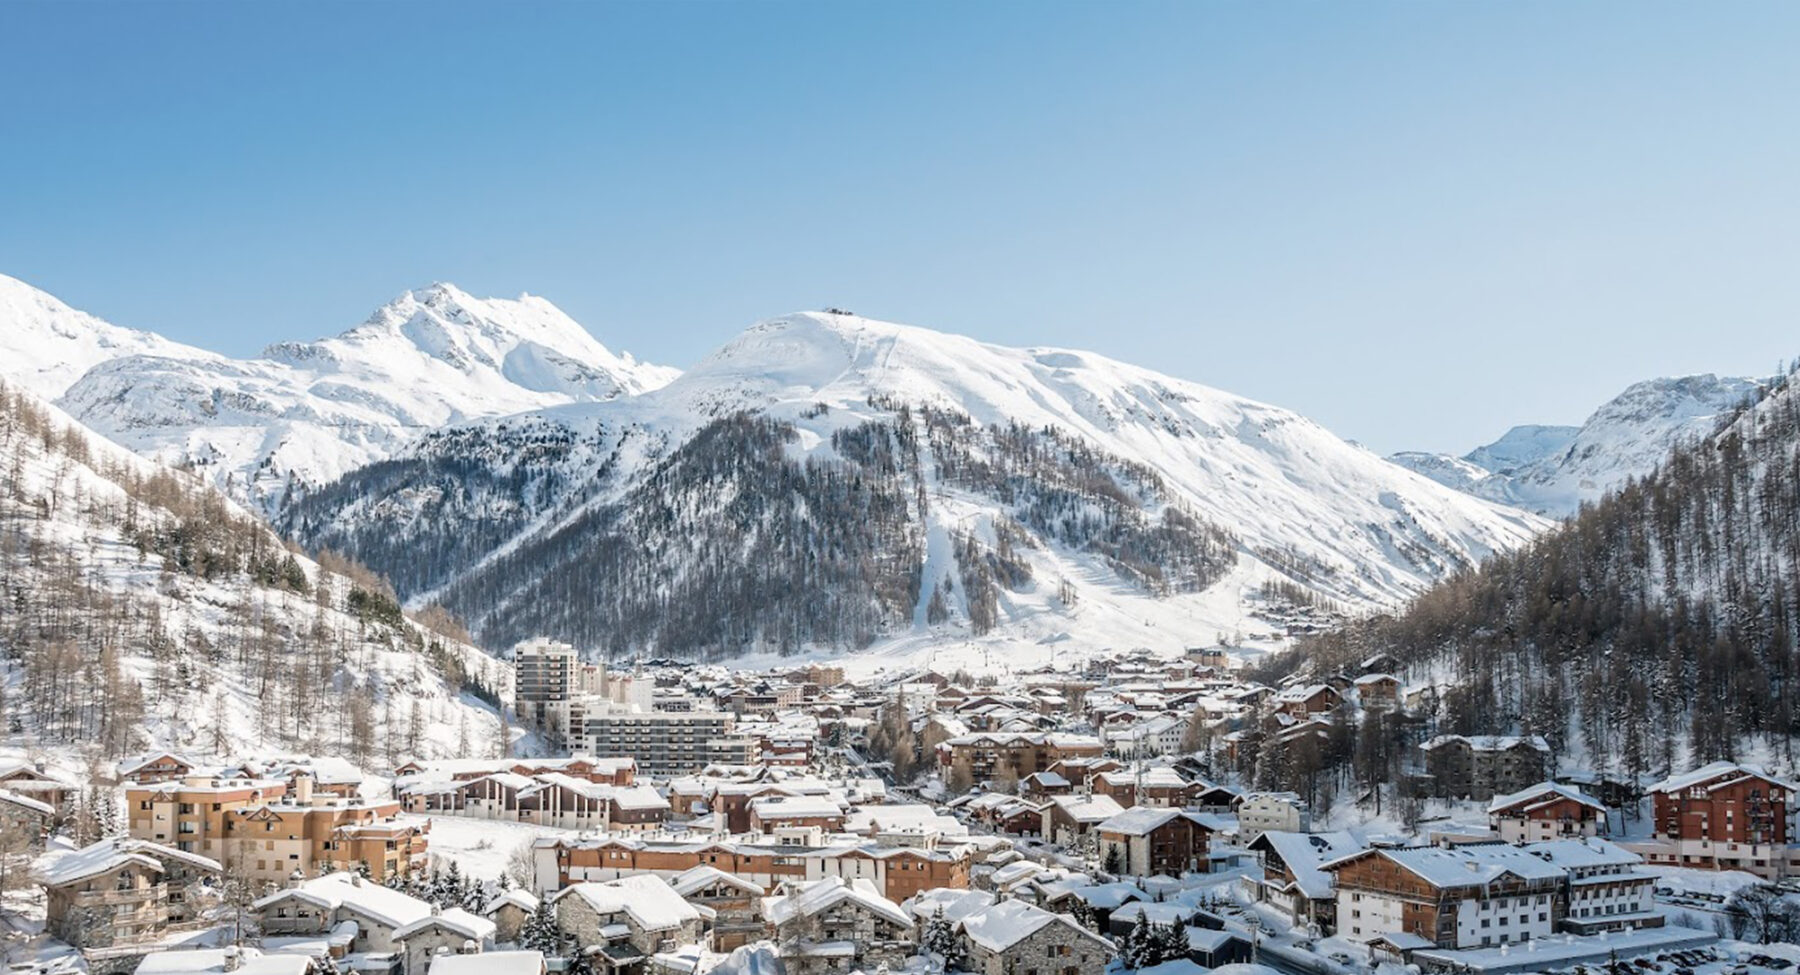 The town of Val d'Isère in the Isère Valley